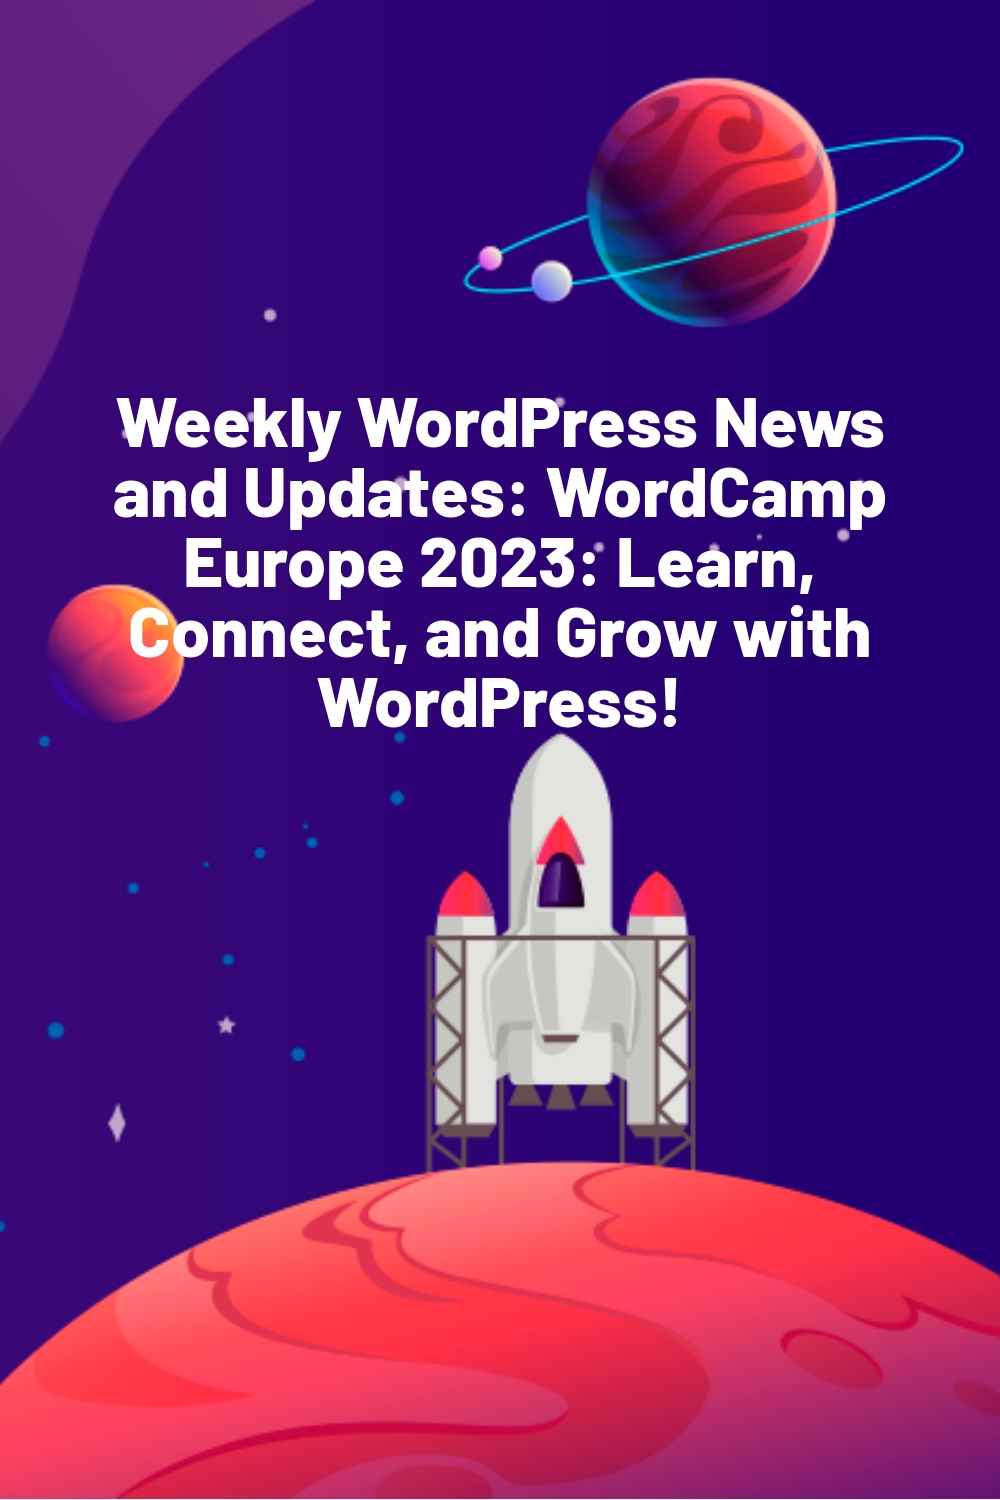 Weekly WordPress News and Updates: WordCamp Europe 2023: Learn, Connect, and Grow with WordPress!